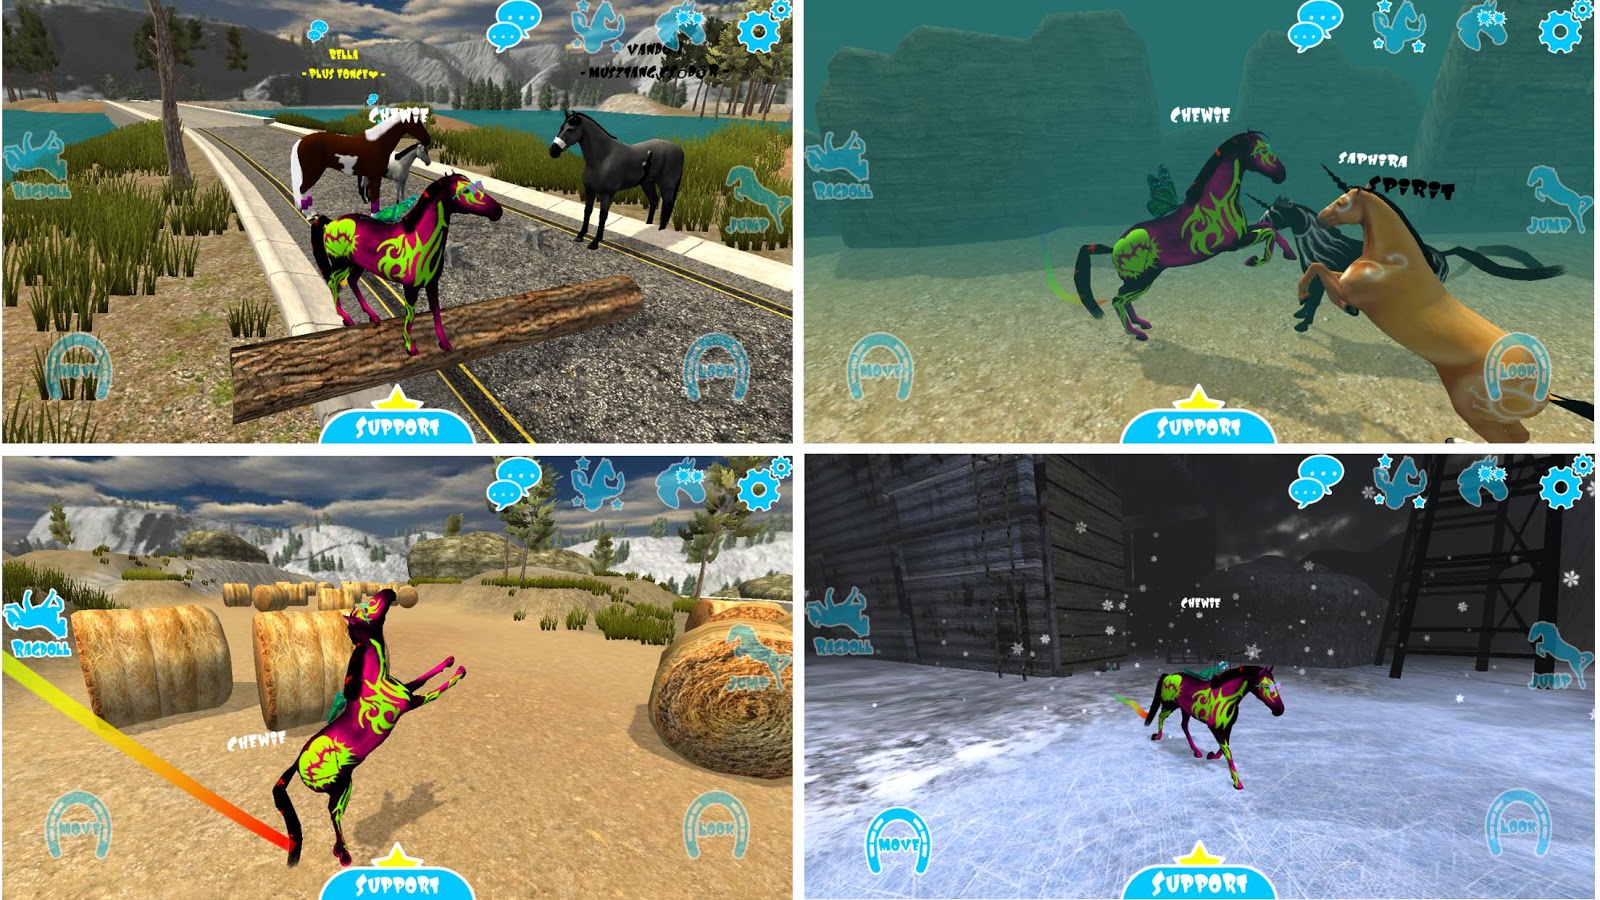 co.uk.flamefalcon.hillcliffhorse 5.47 APK Download - Android ... - 